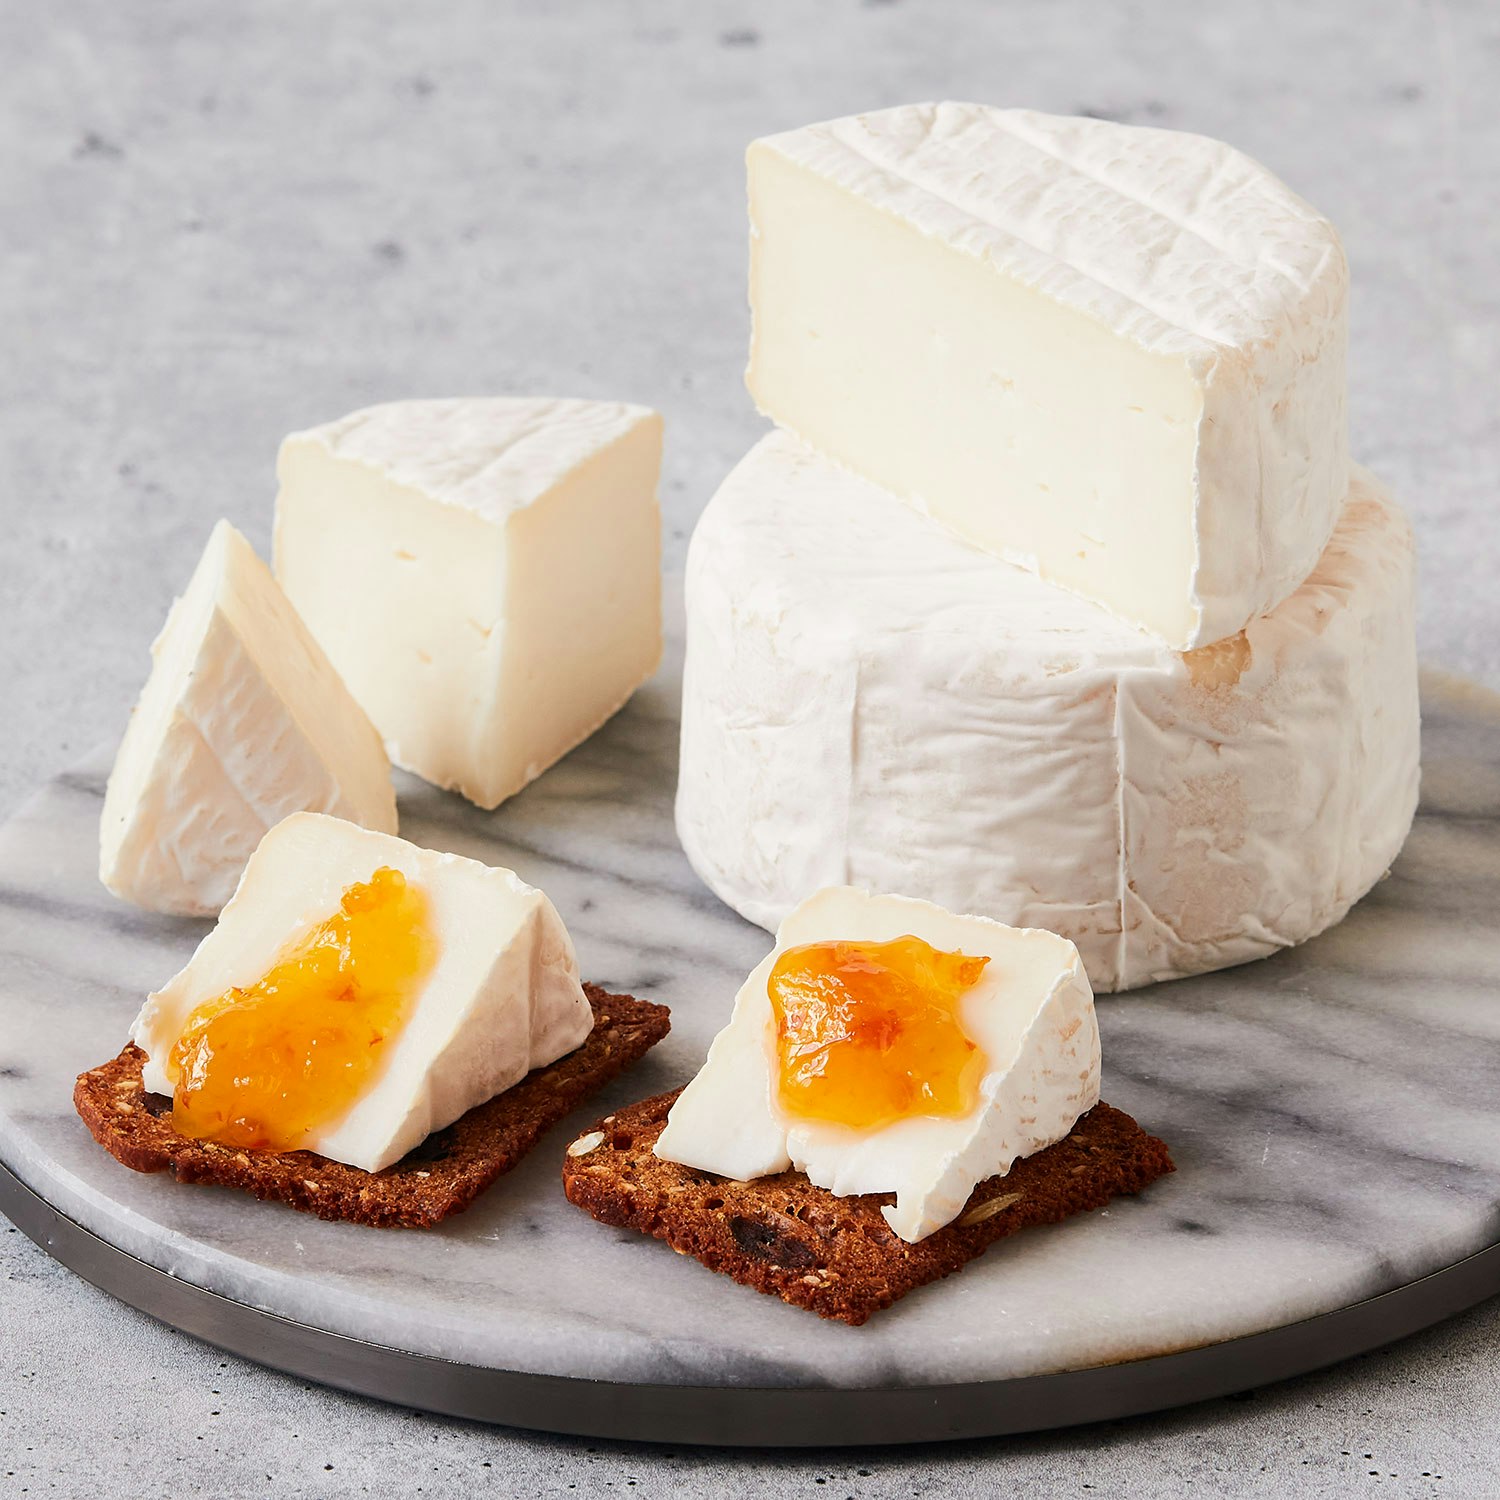 Firefly Farms Merry Goat Round cheese